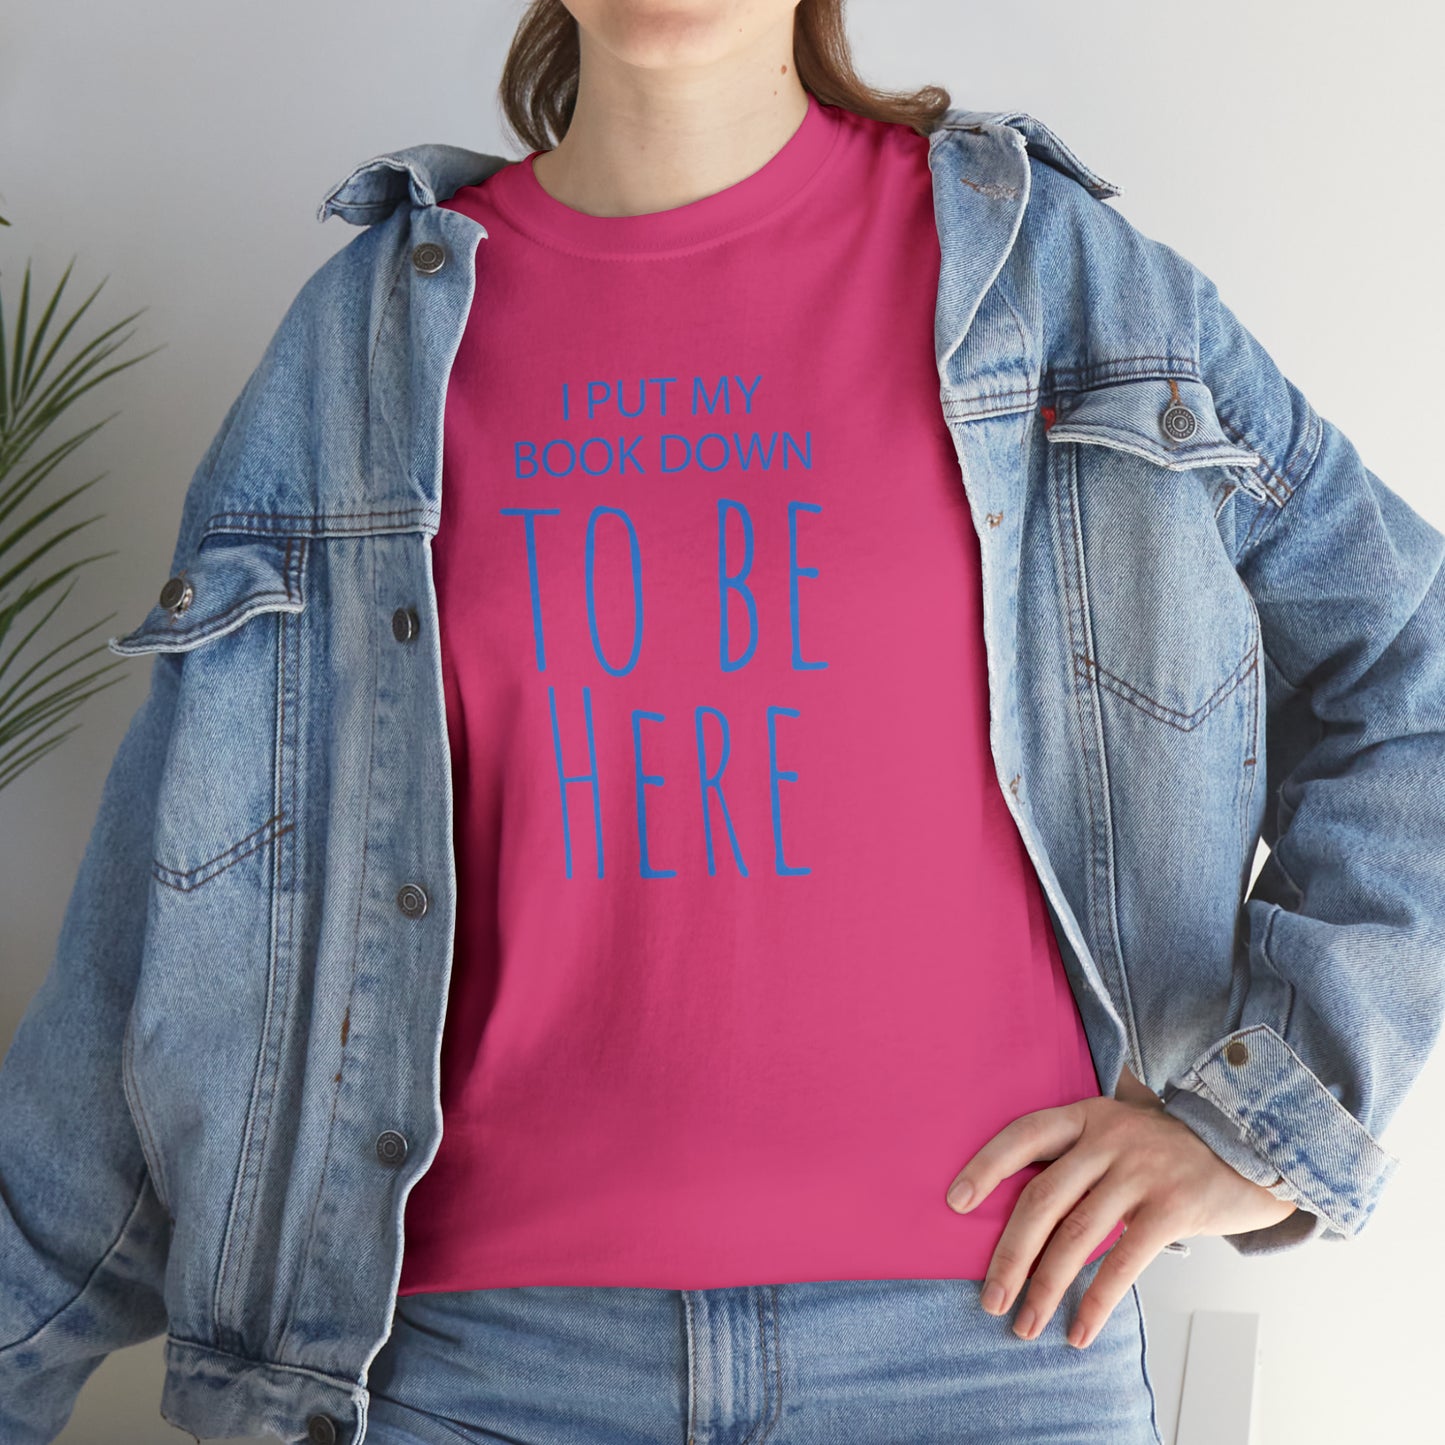 To Be Here - Cotton Tee